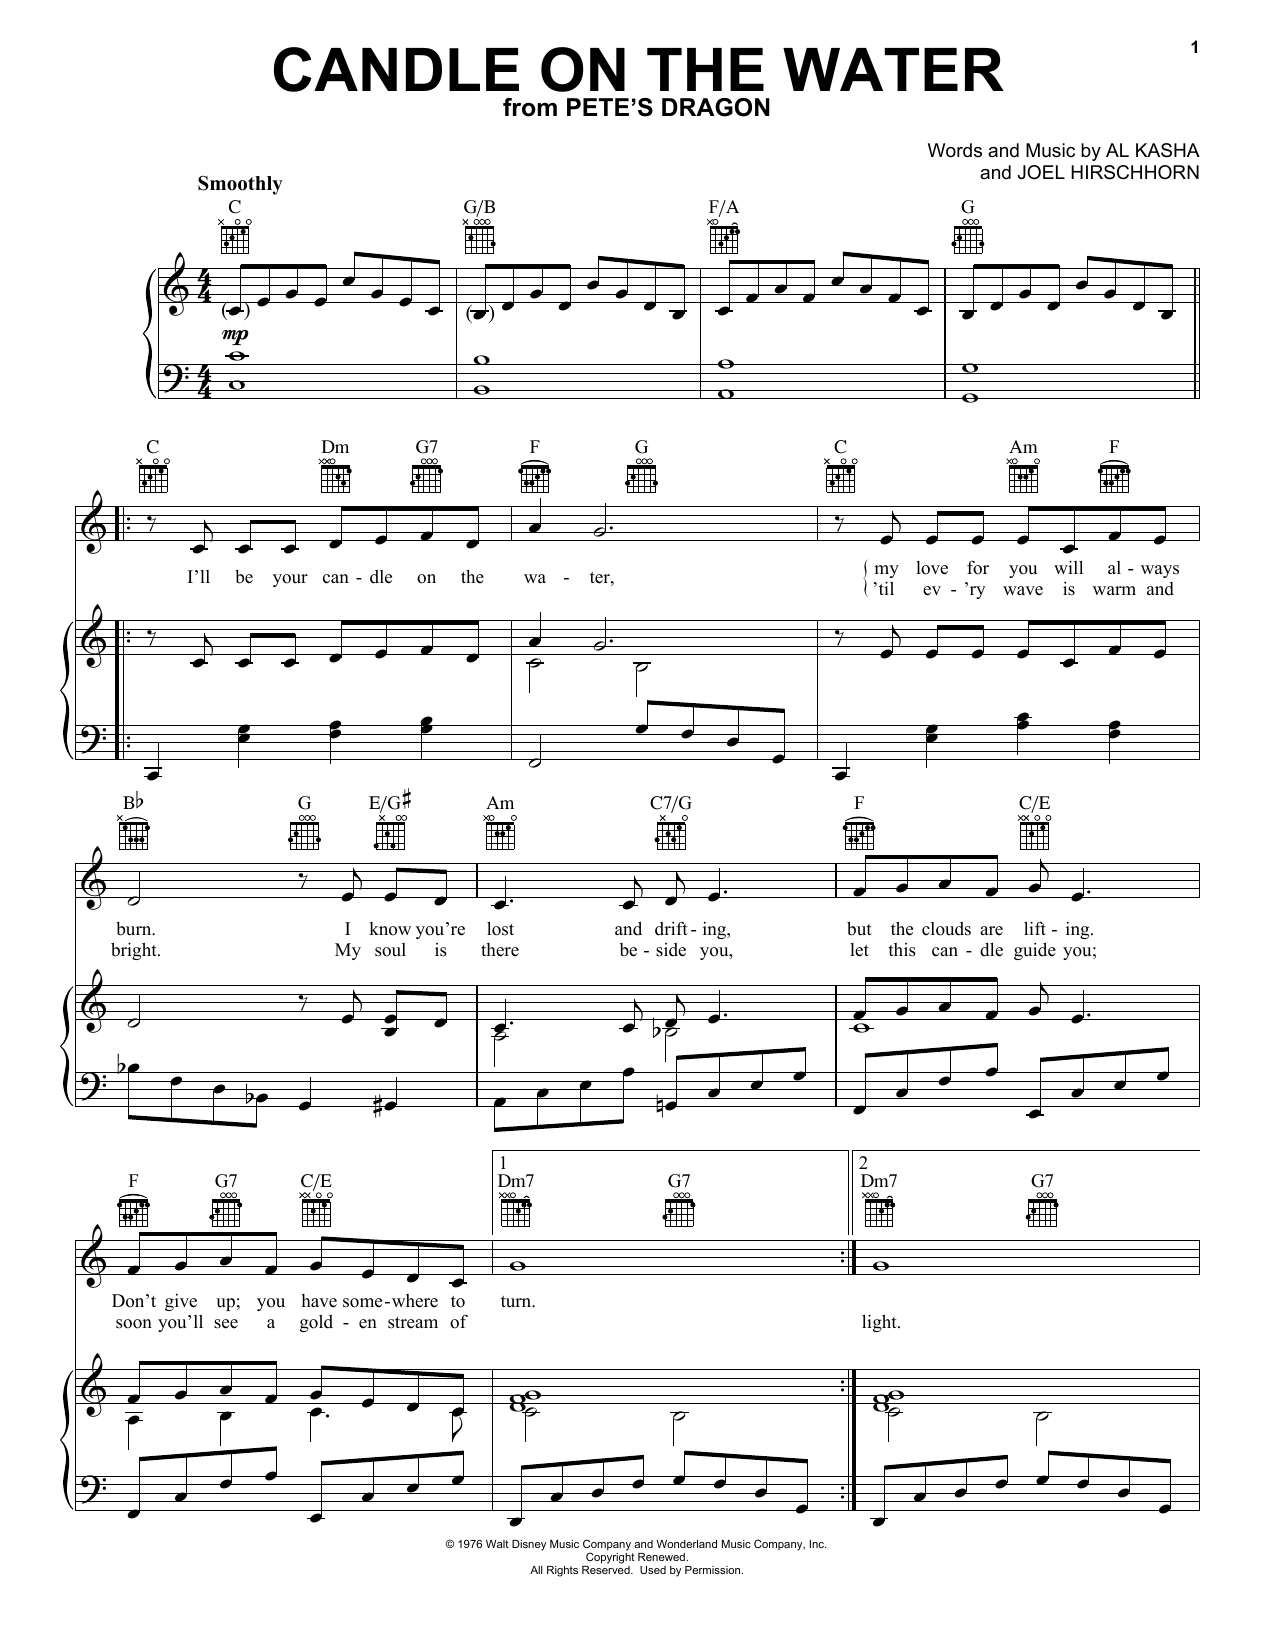 Al Kasha Candle On The Water sheet music notes and chords. Download Printable PDF.